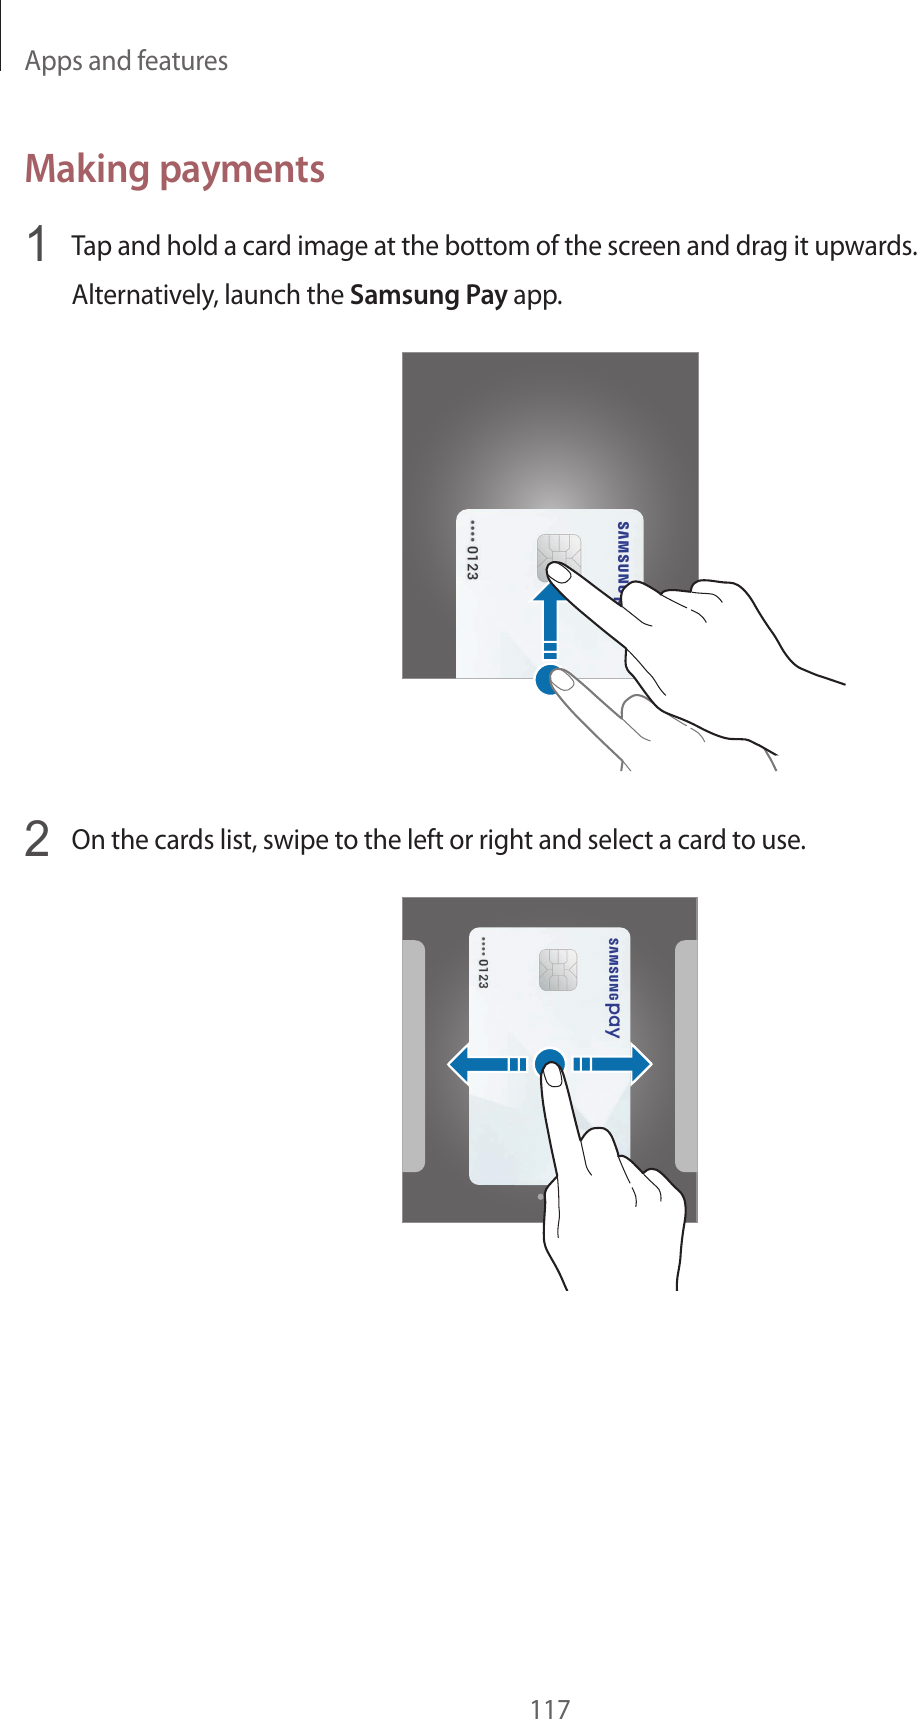 Apps and features117Making payments1  Tap and hold a card image at the bottom of the screen and drag it upwards.Alternatively, launch the Samsung Pay app.2  On the cards list, swipe to the left or right and select a card to use.